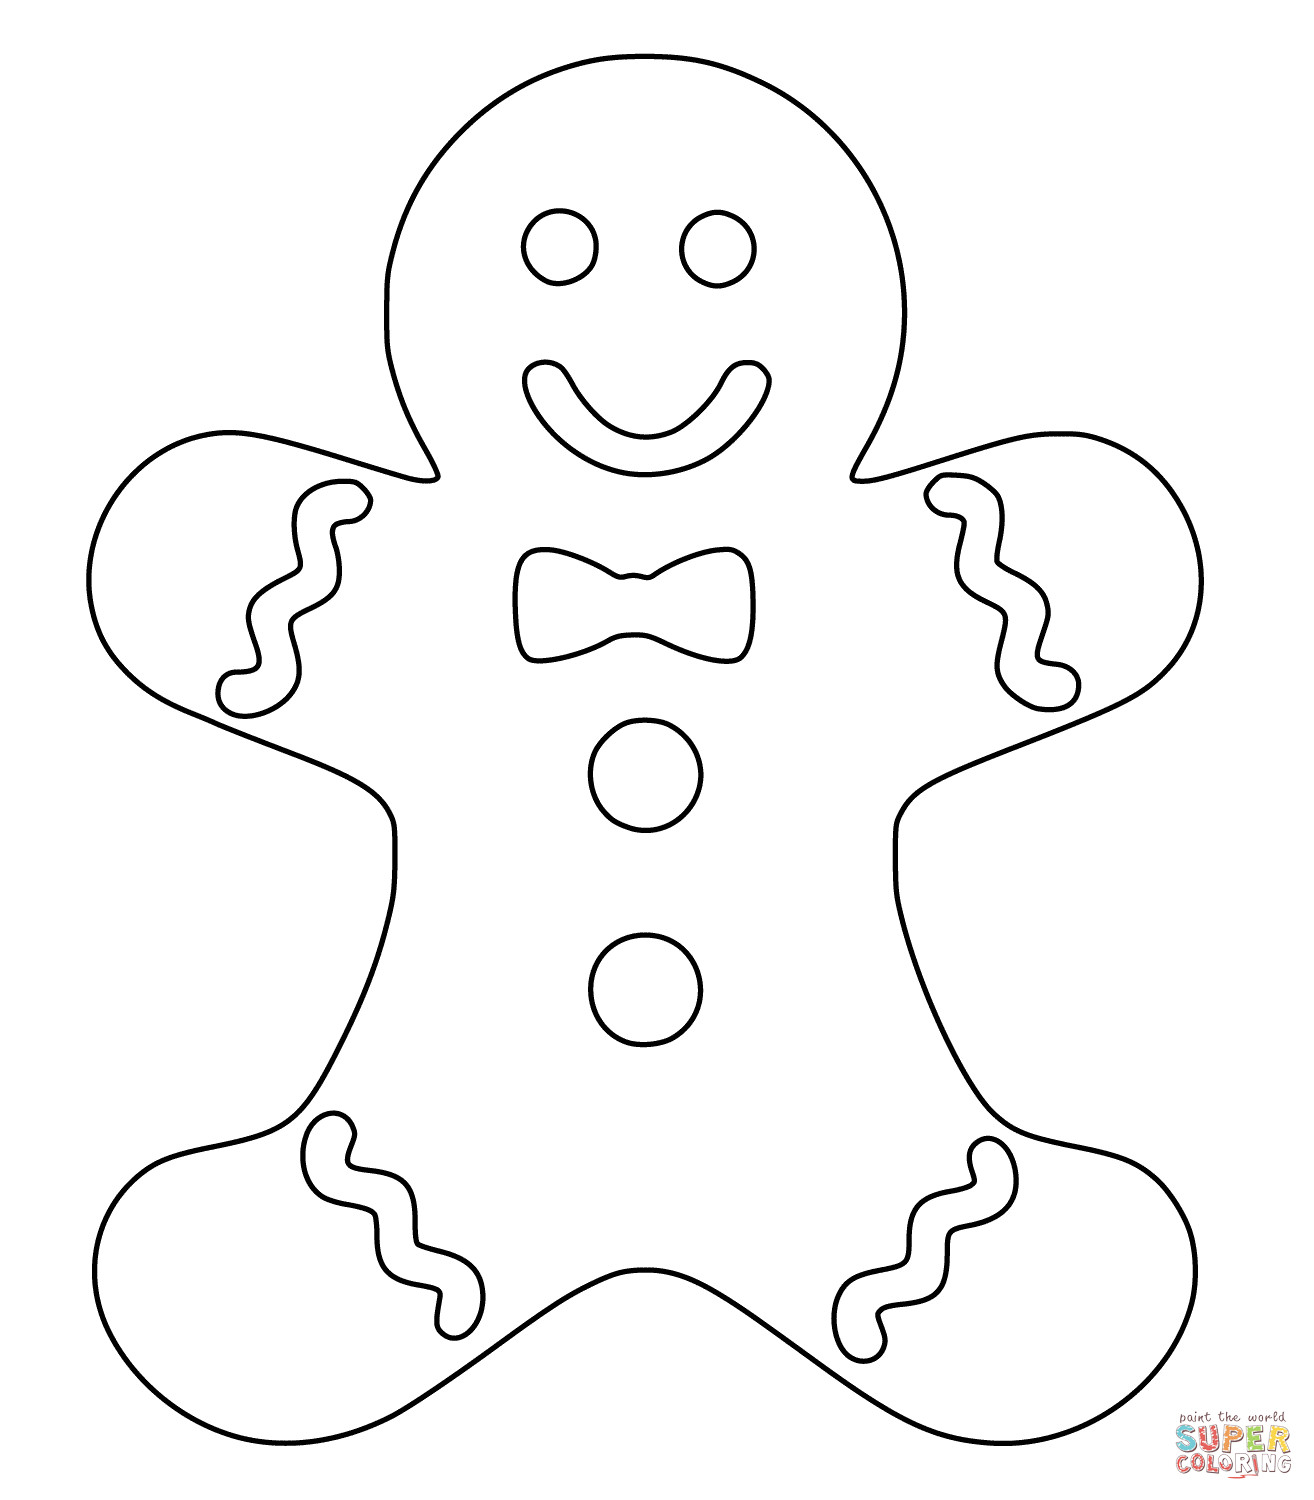 Gingerbread Coloring Pages
 Christmas Gingerbread Man coloring page